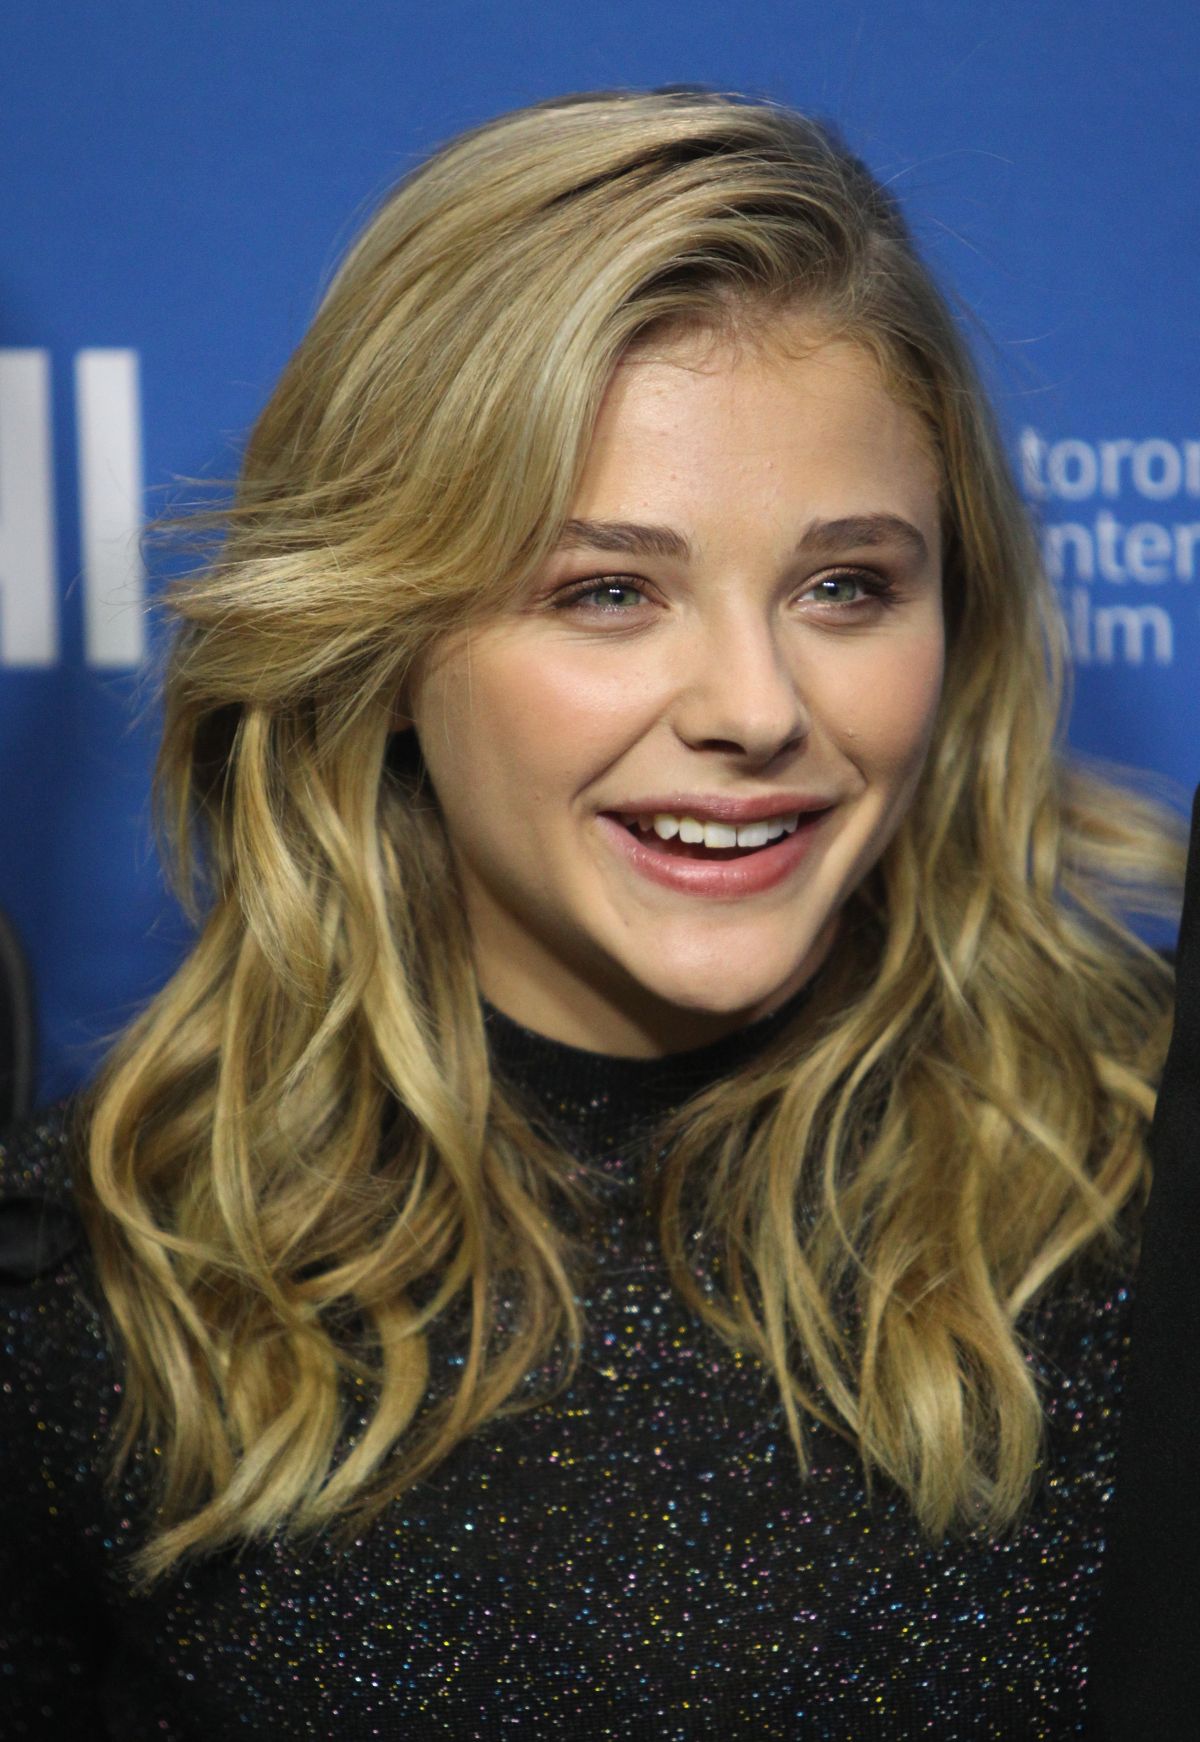 CHLOE MORETZ at The Equalizer Press Conference in Toronto - HawtCelebs